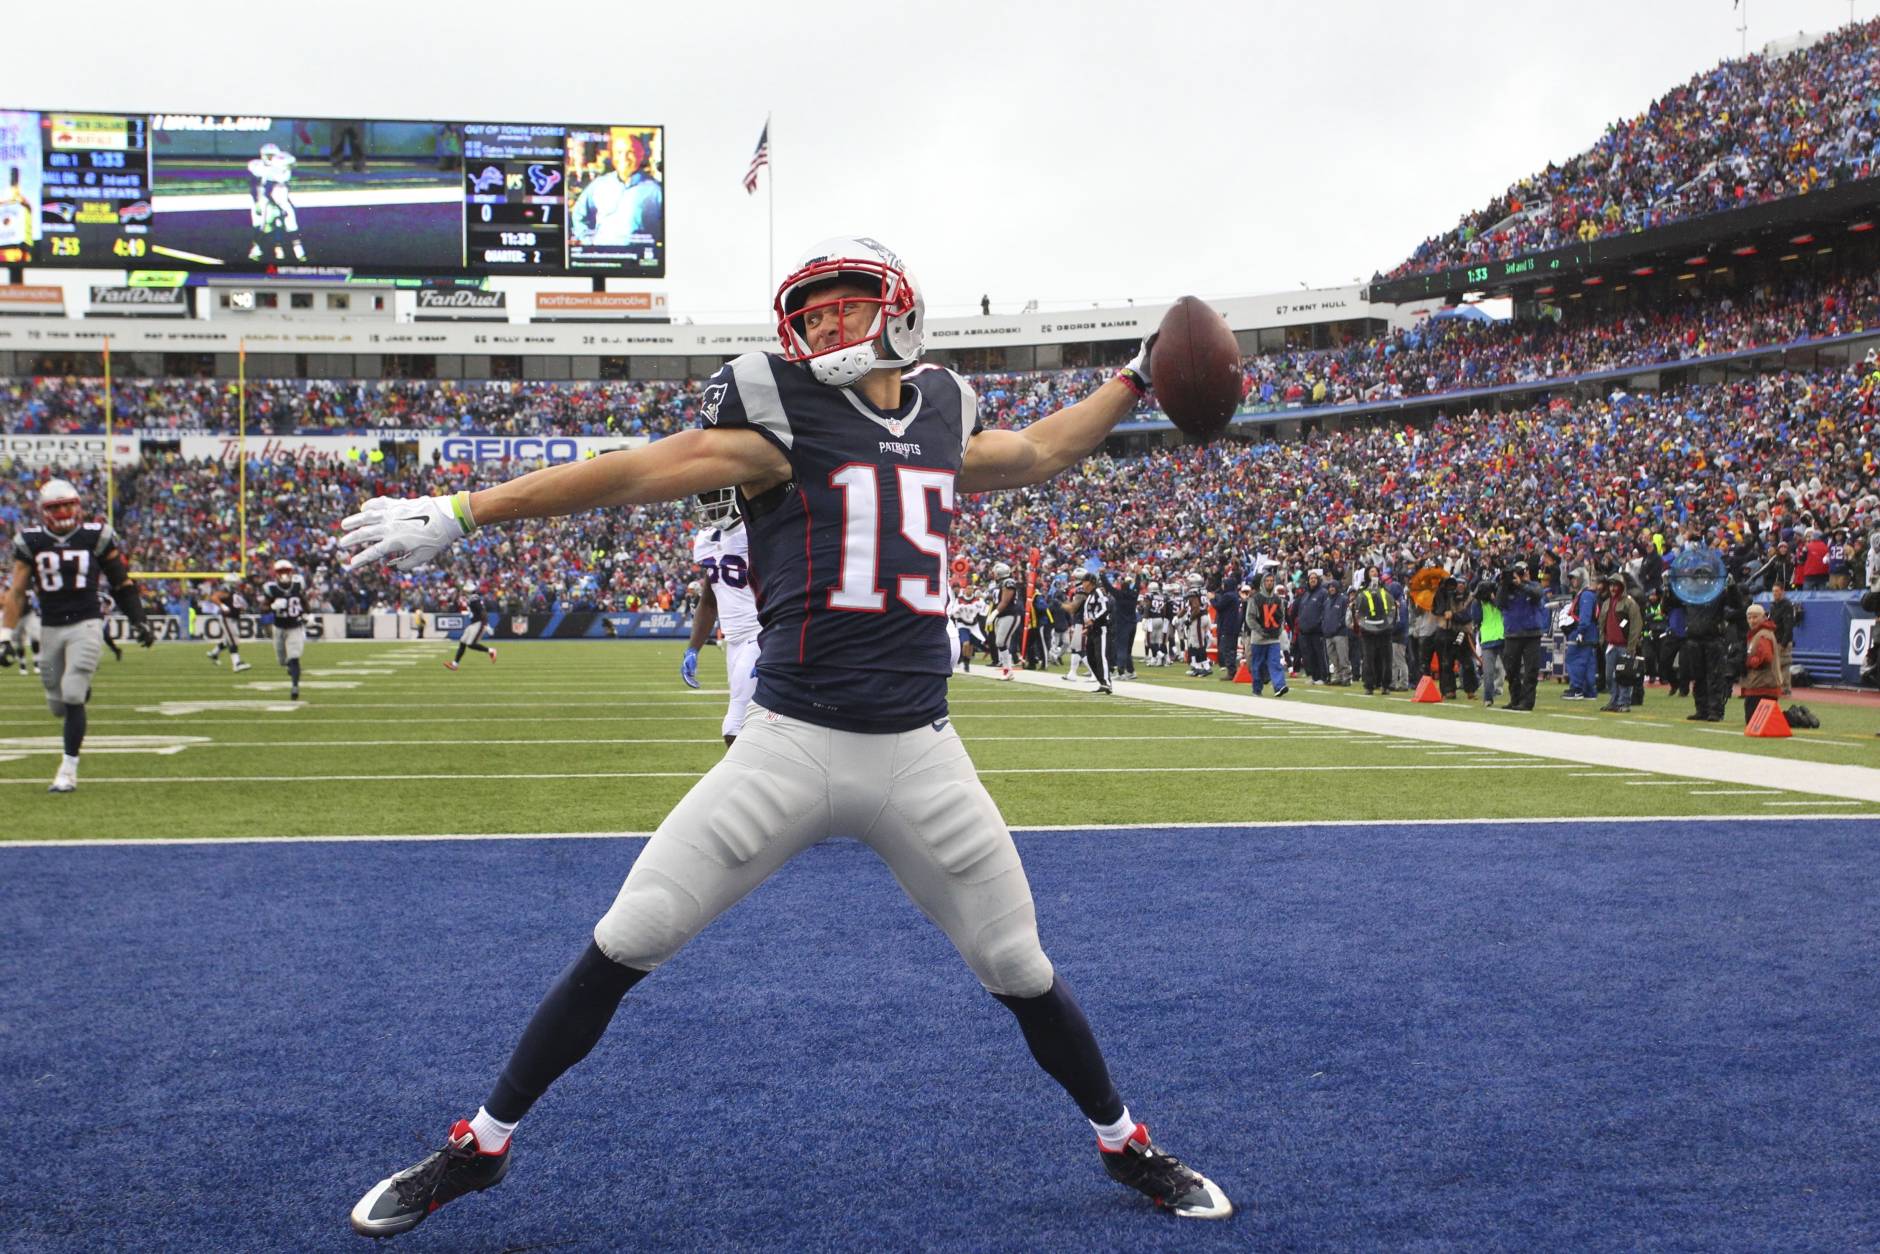 New England Patriots' Chris Hogan (15) celebrates after scoring a touchdown during the first half of an NFL football game against the Buffalo Bills Sunday, Oct. 30, 2016, in Orchard Park, N.Y. (AP Photo/Bill Wippert)